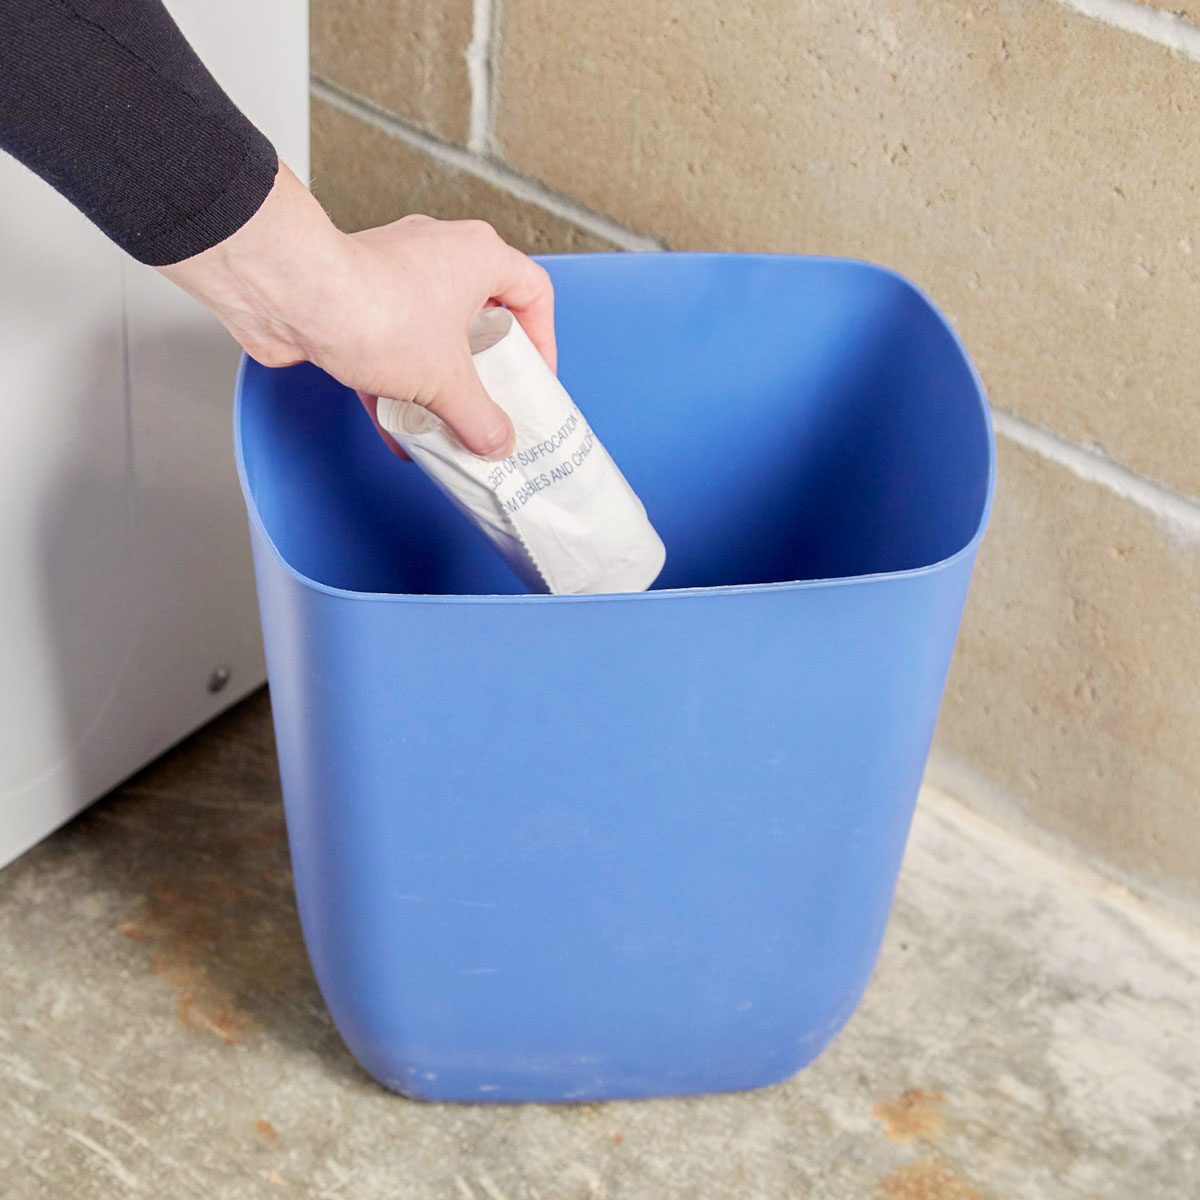 hand placing a roll of garbage bags at the bottom of a trash can